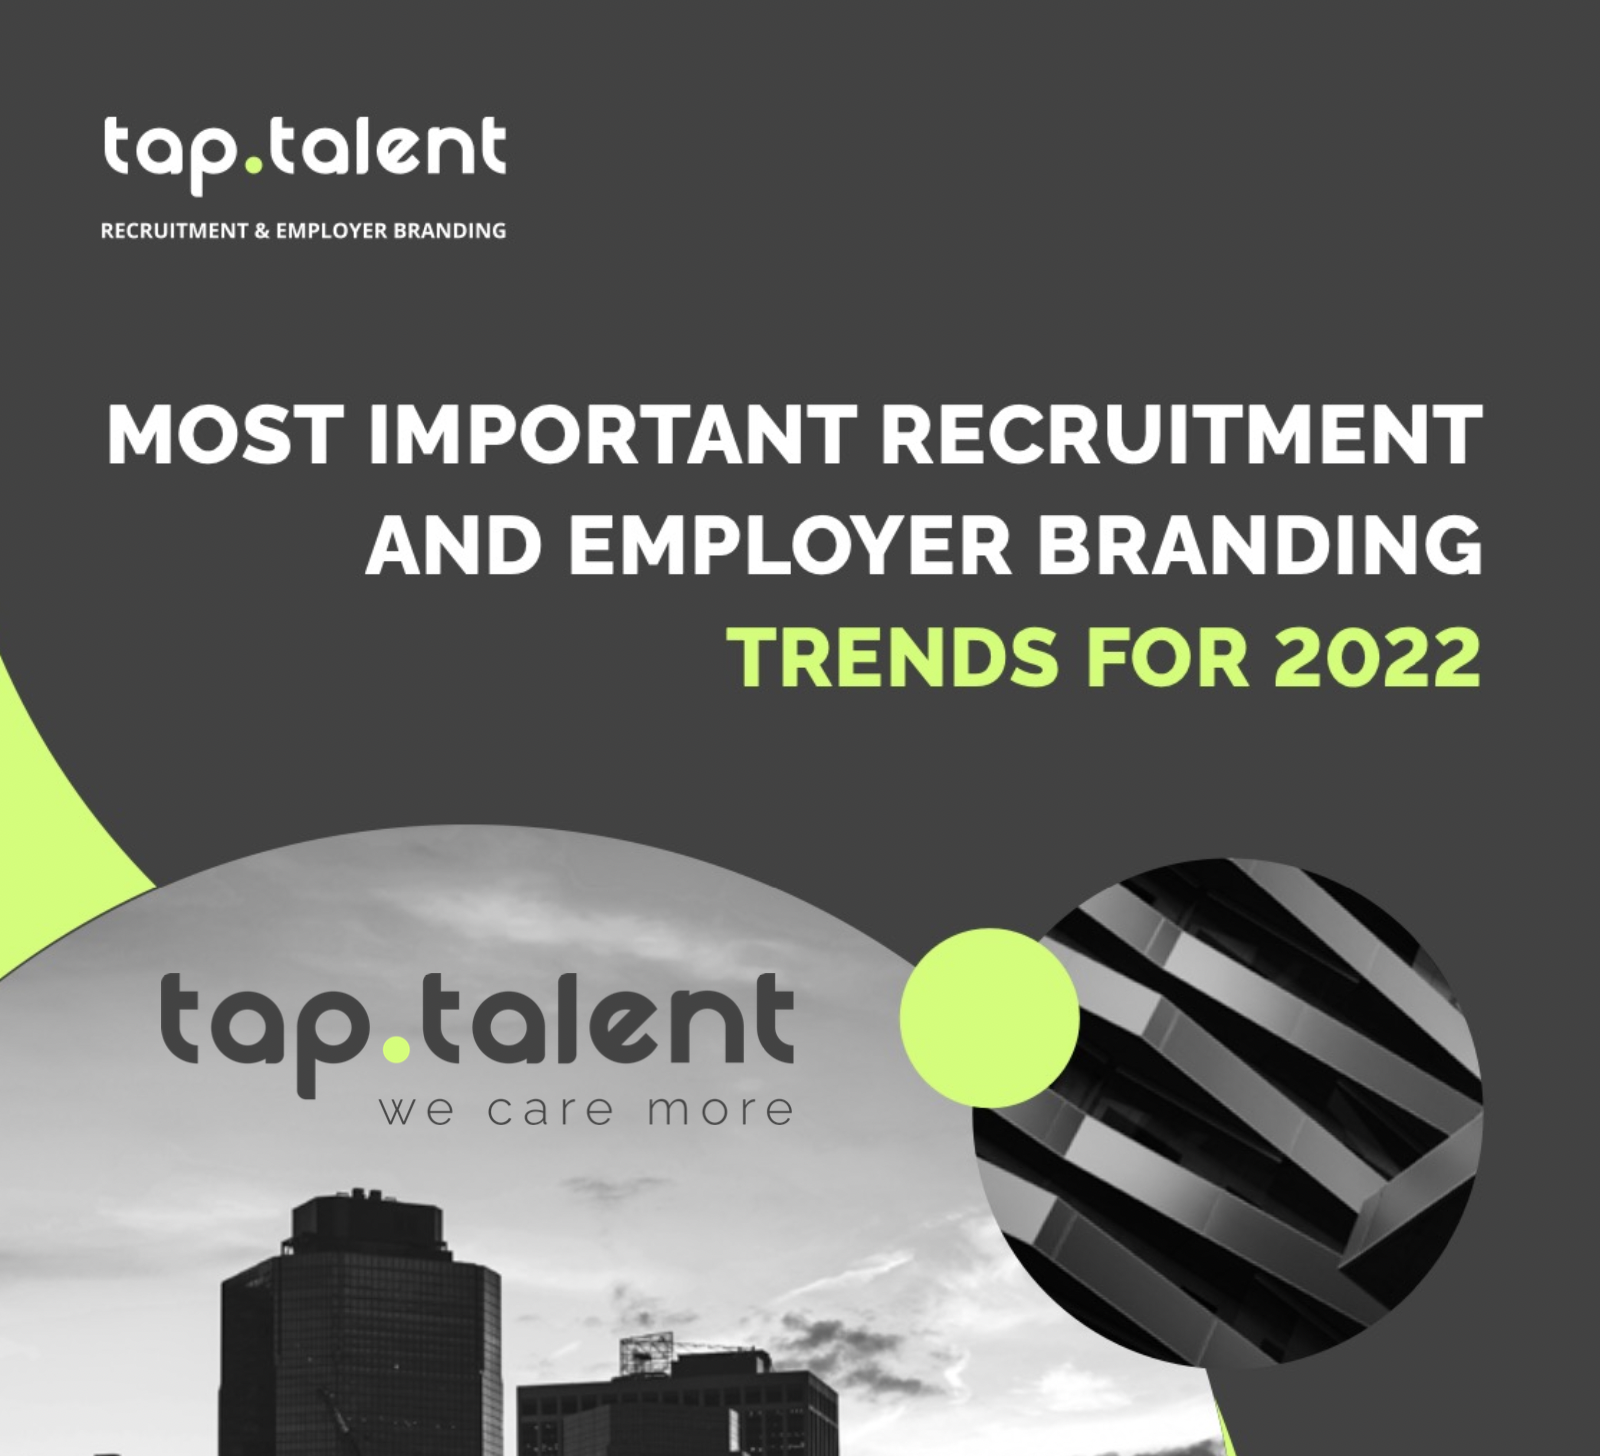 Most important recruitment and employer branding trends for 2022